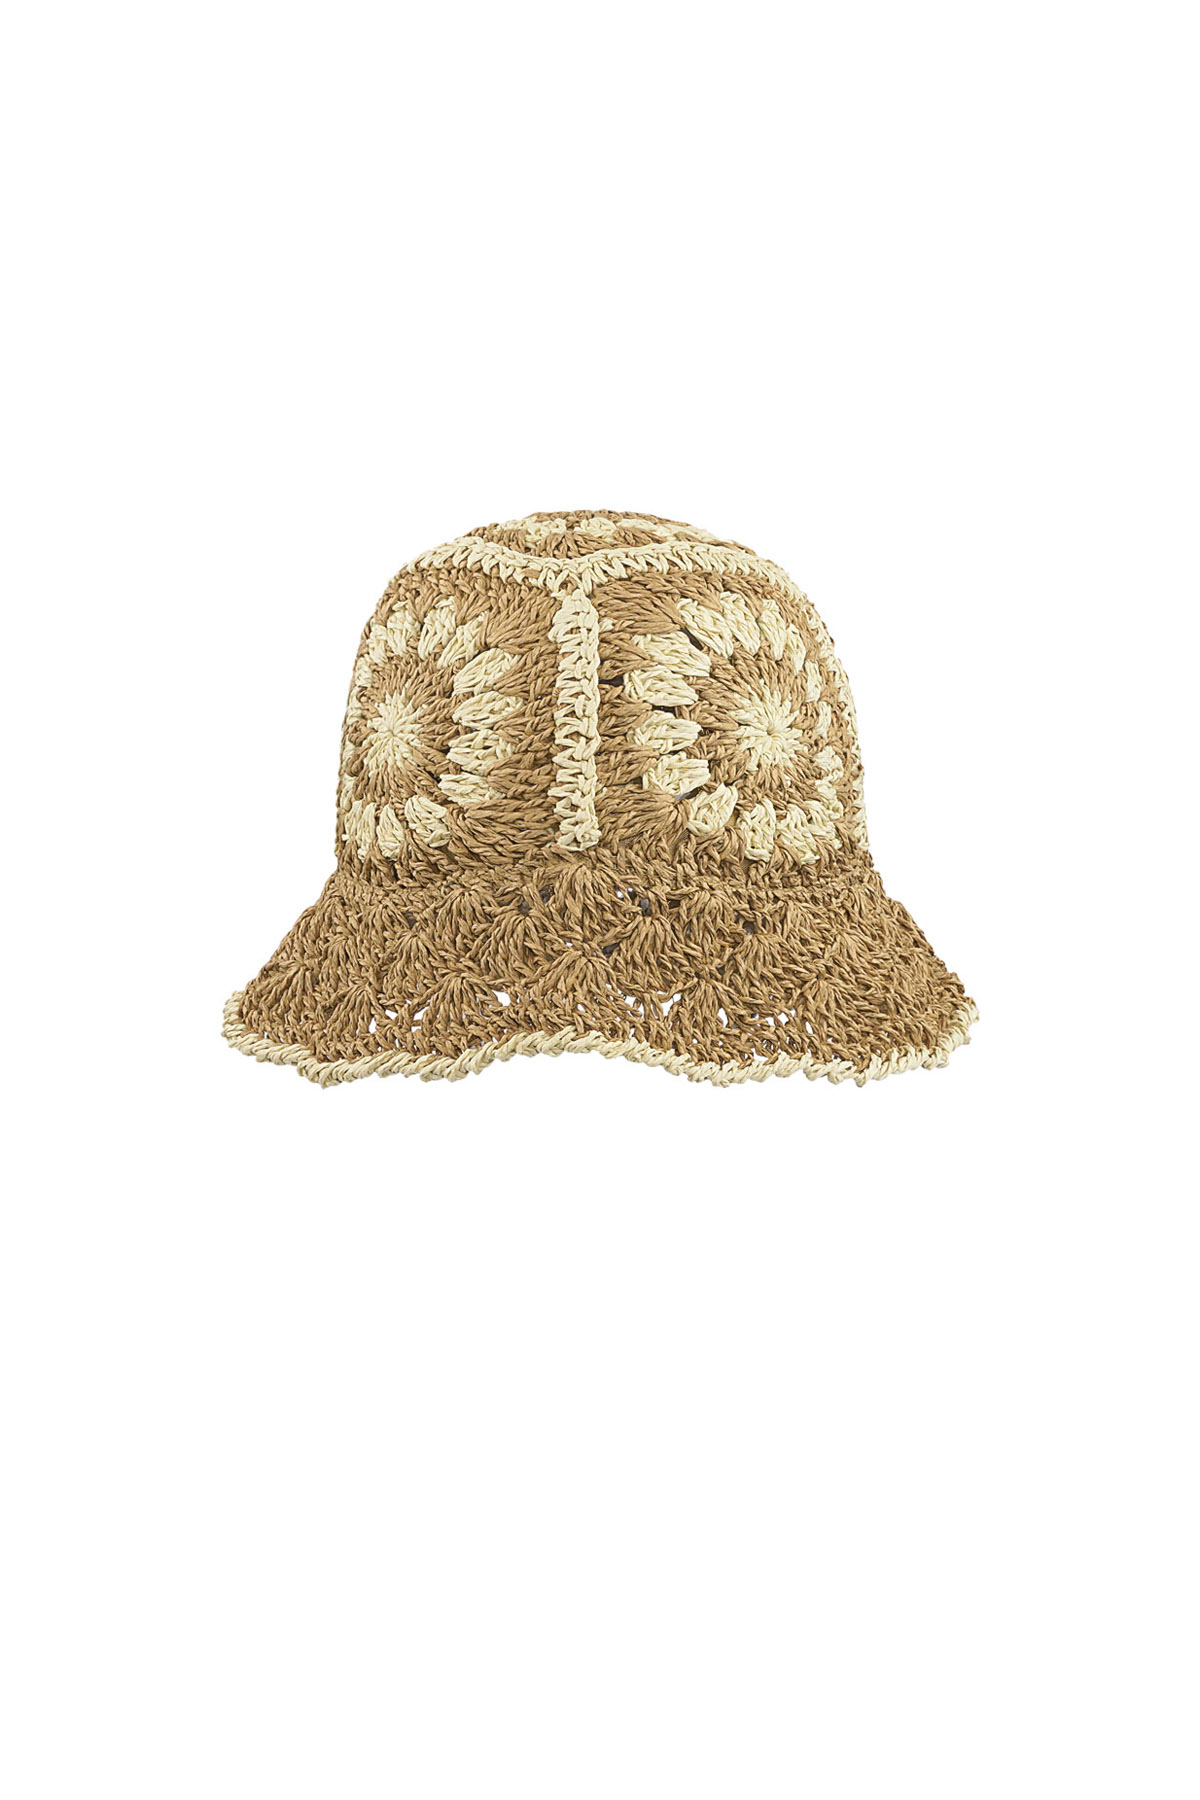 Crochet hat with flowers - camel h5 